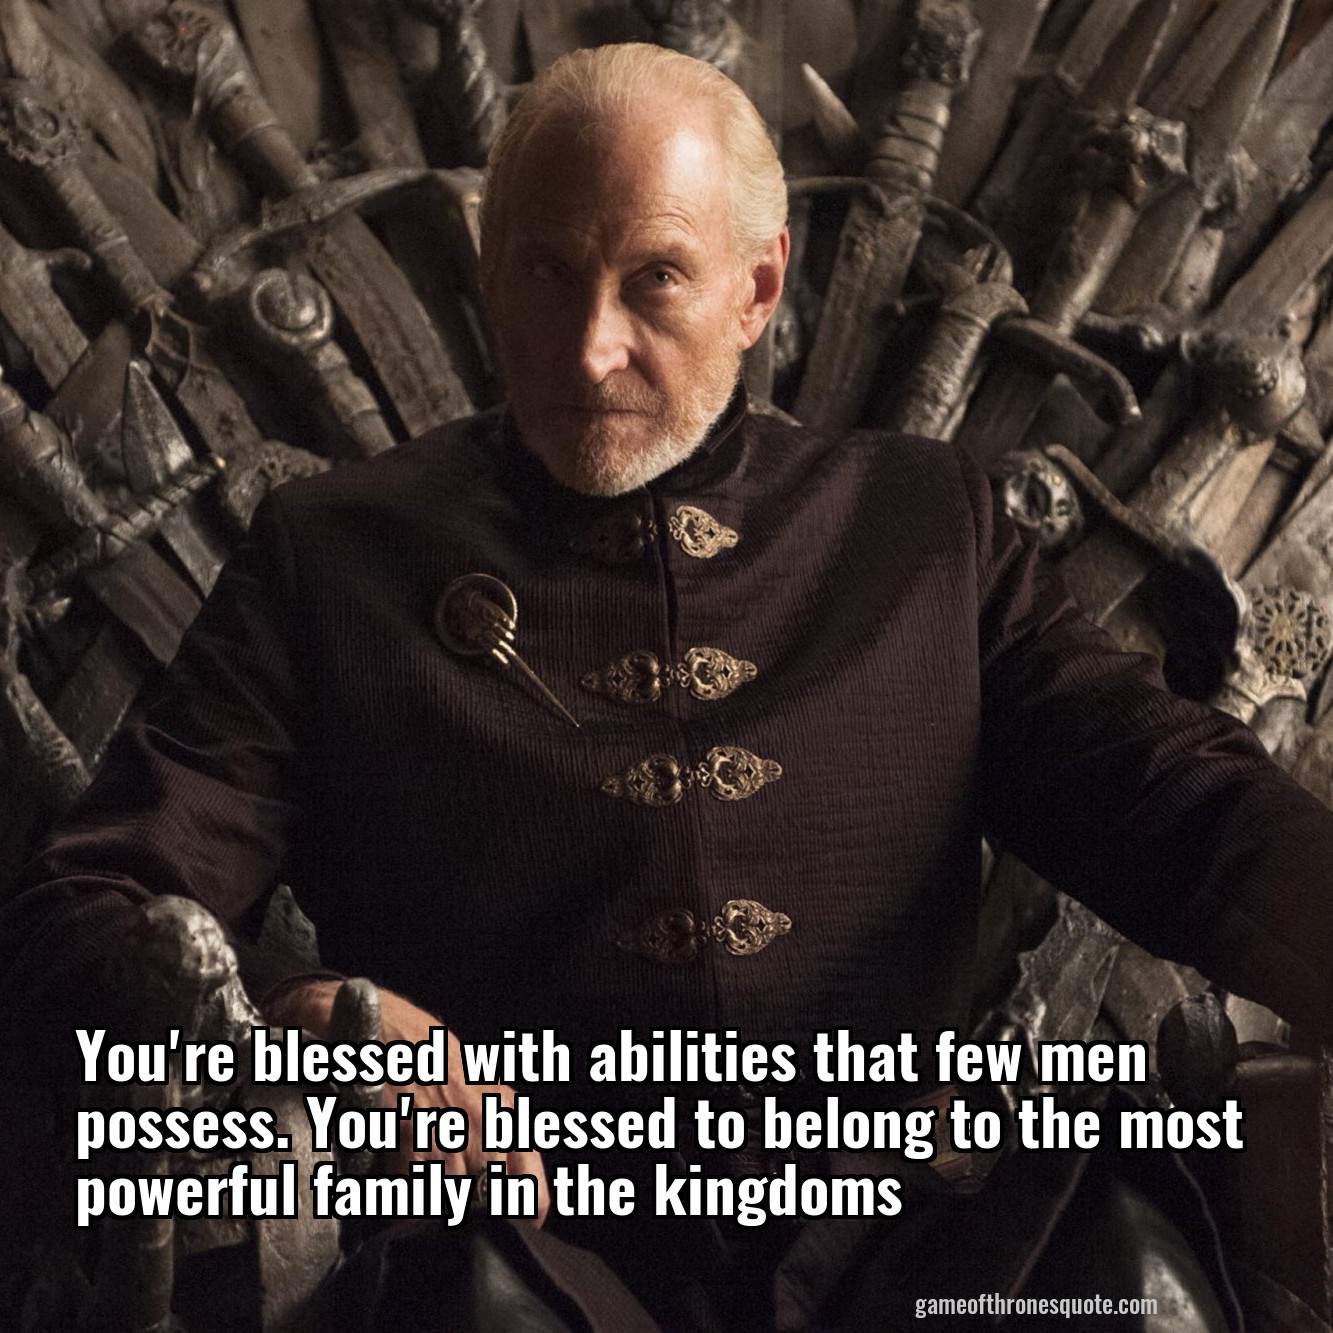 You're blessed with abilities that few men possess. You're blessed to belong to the most powerful family in the kingdoms